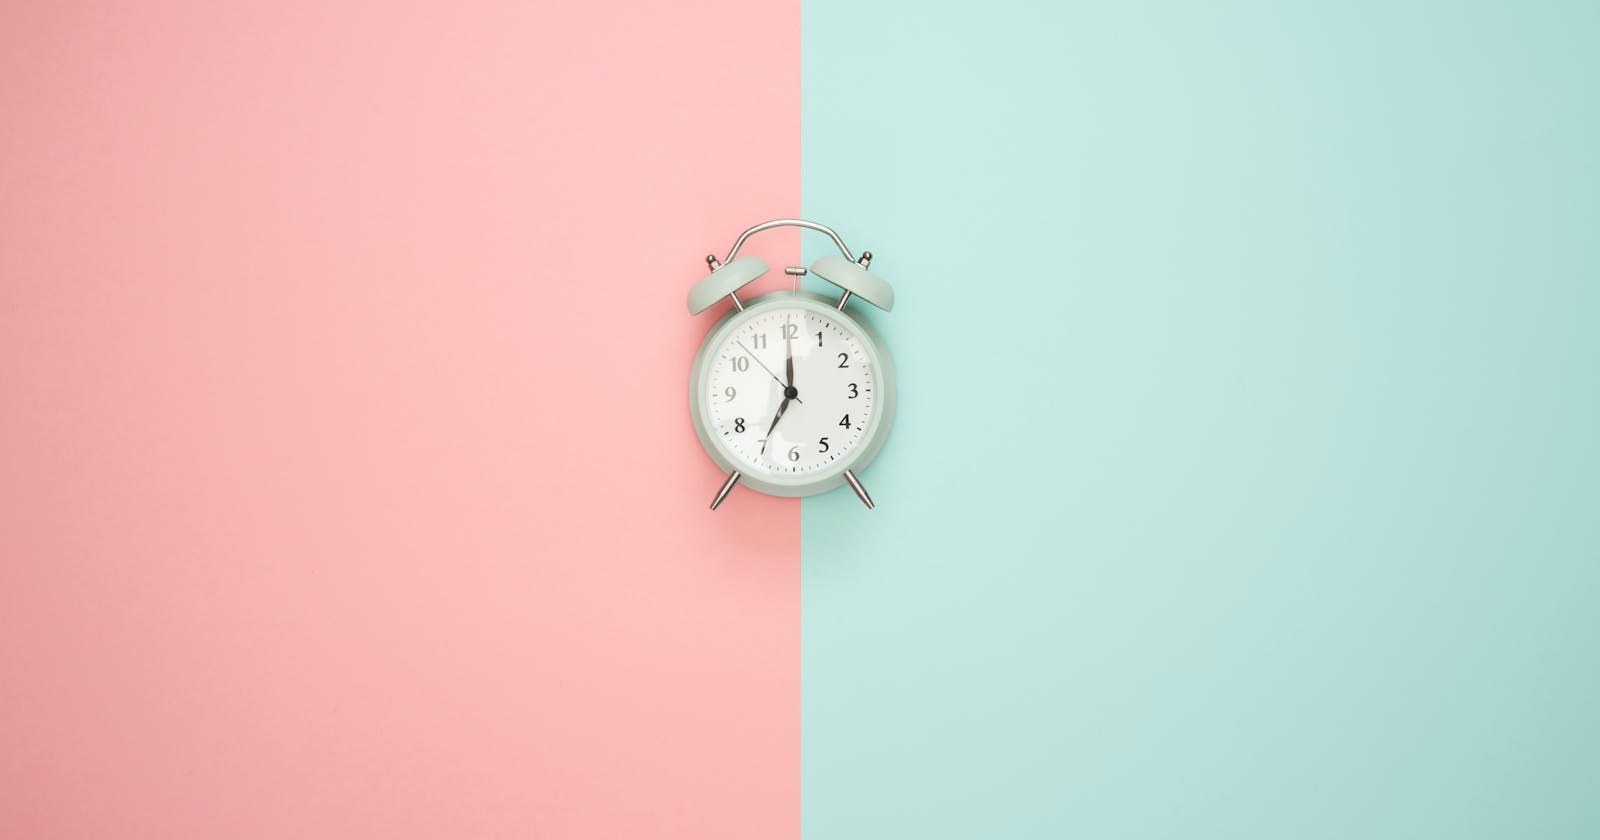 How to Return Recurring Elements in a Javascript Array With O(n) Time Complexity